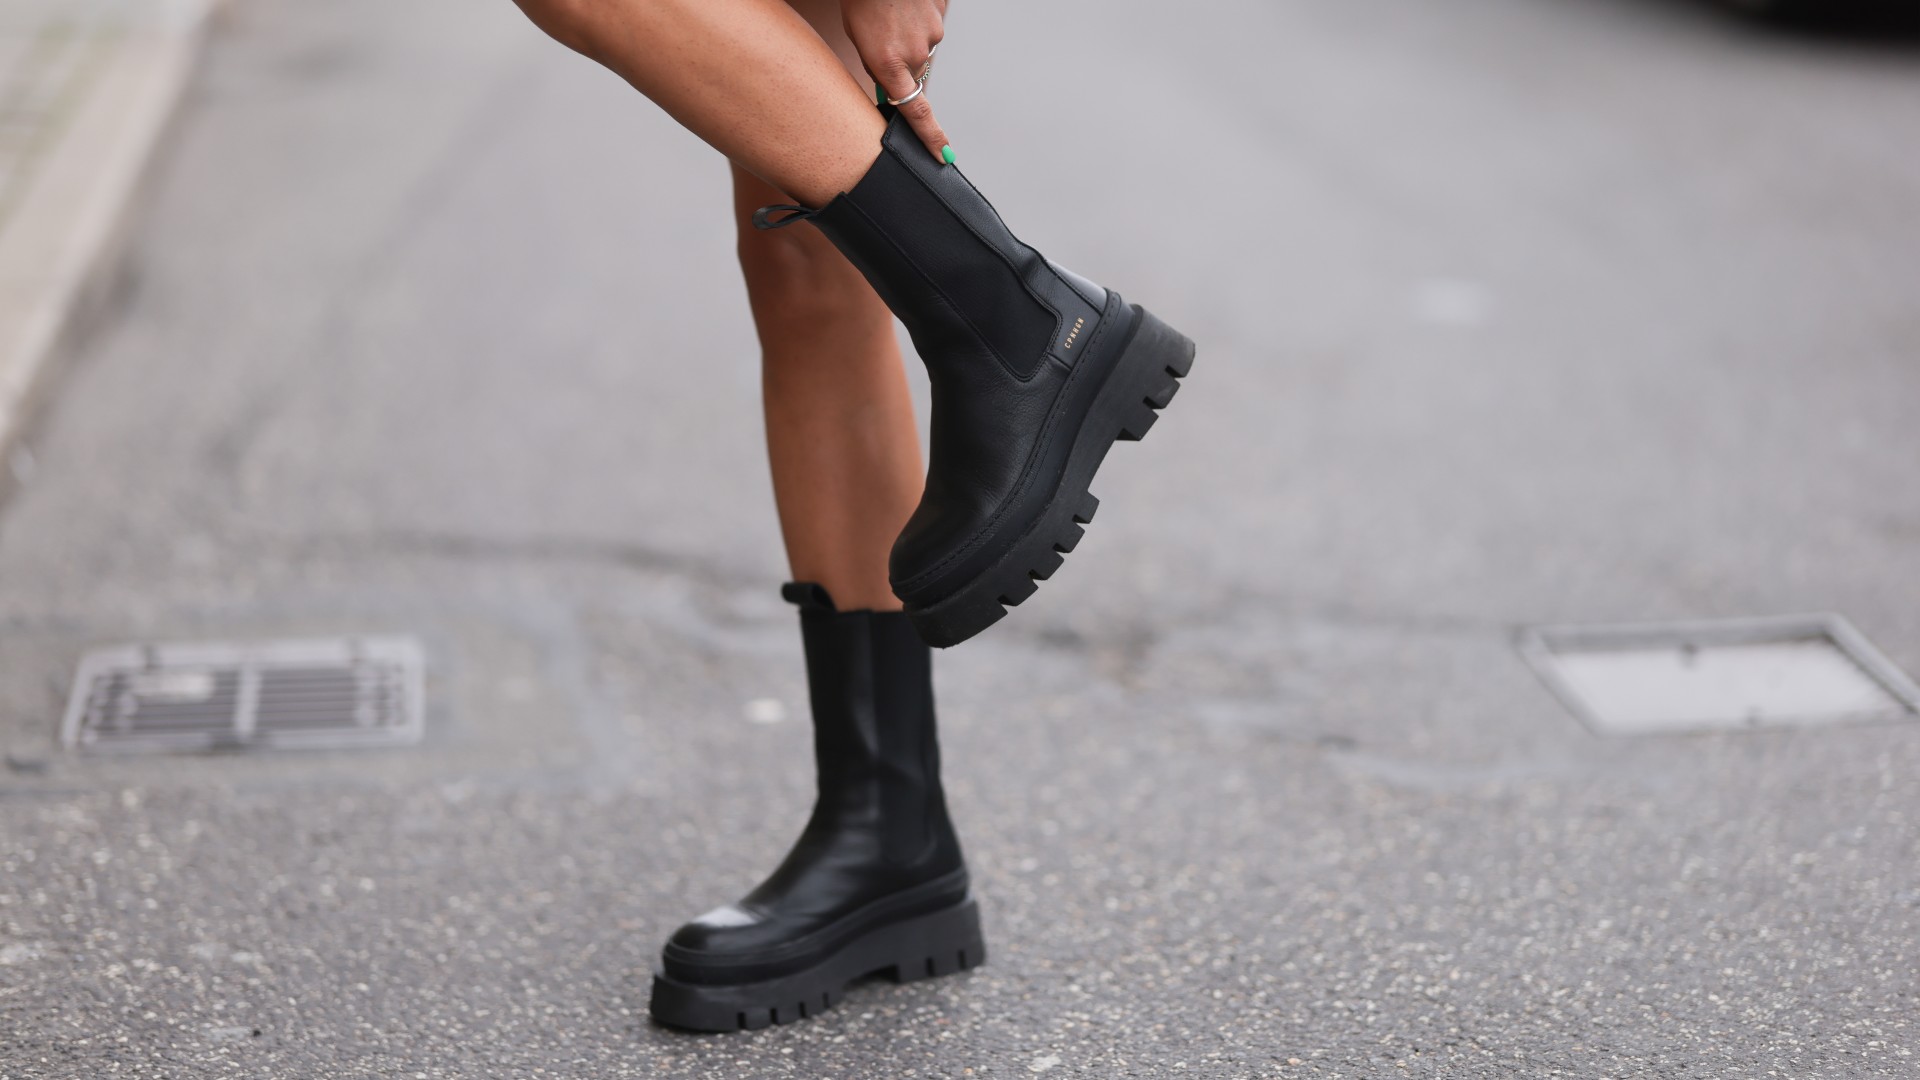 Womens Sock Boots  Sock Ankle Boots - Public Desire USA